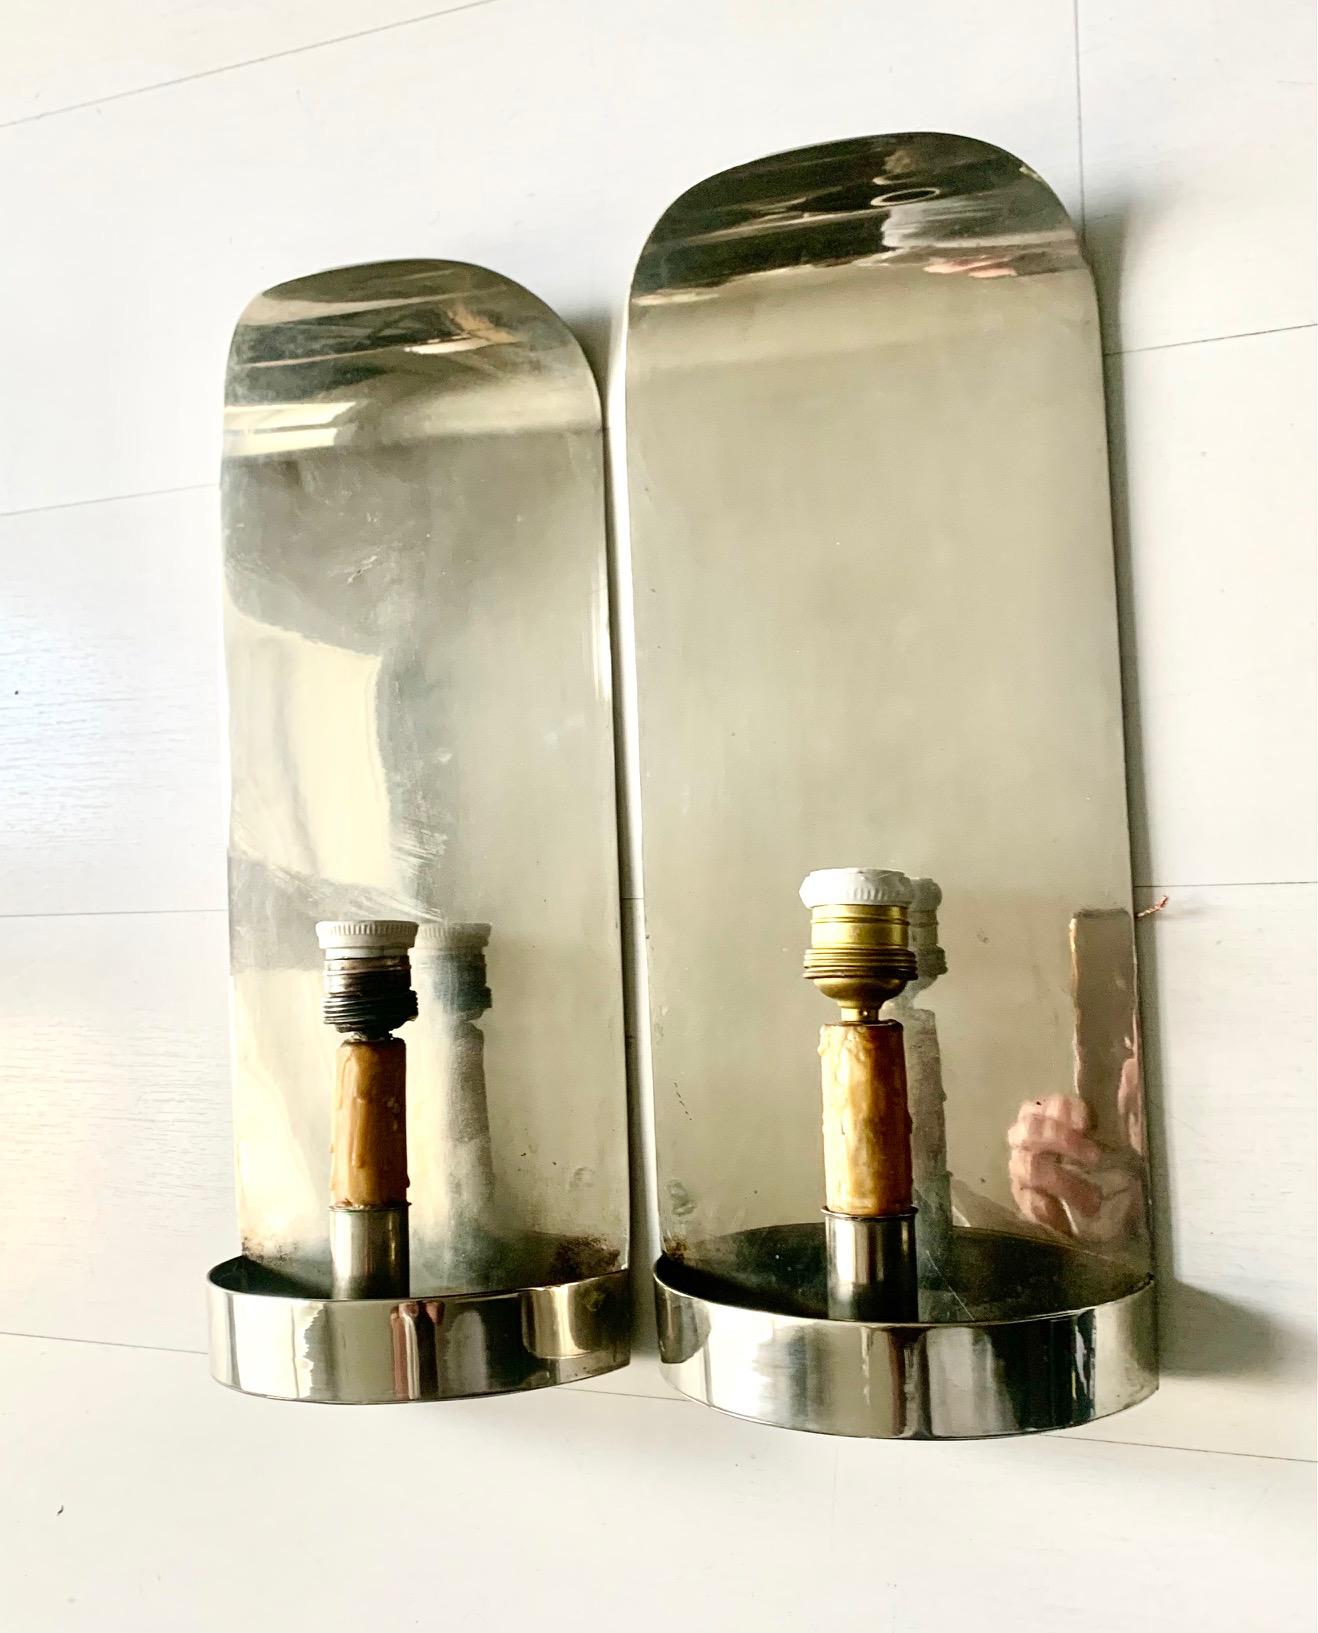 A pair of vintage sconces from the 70s, from the Valenti house, made of chromed metal with a wax bulb base imitating a candle, the lamp shades are original to the sconces.That's why they have some wear on the edges.
​